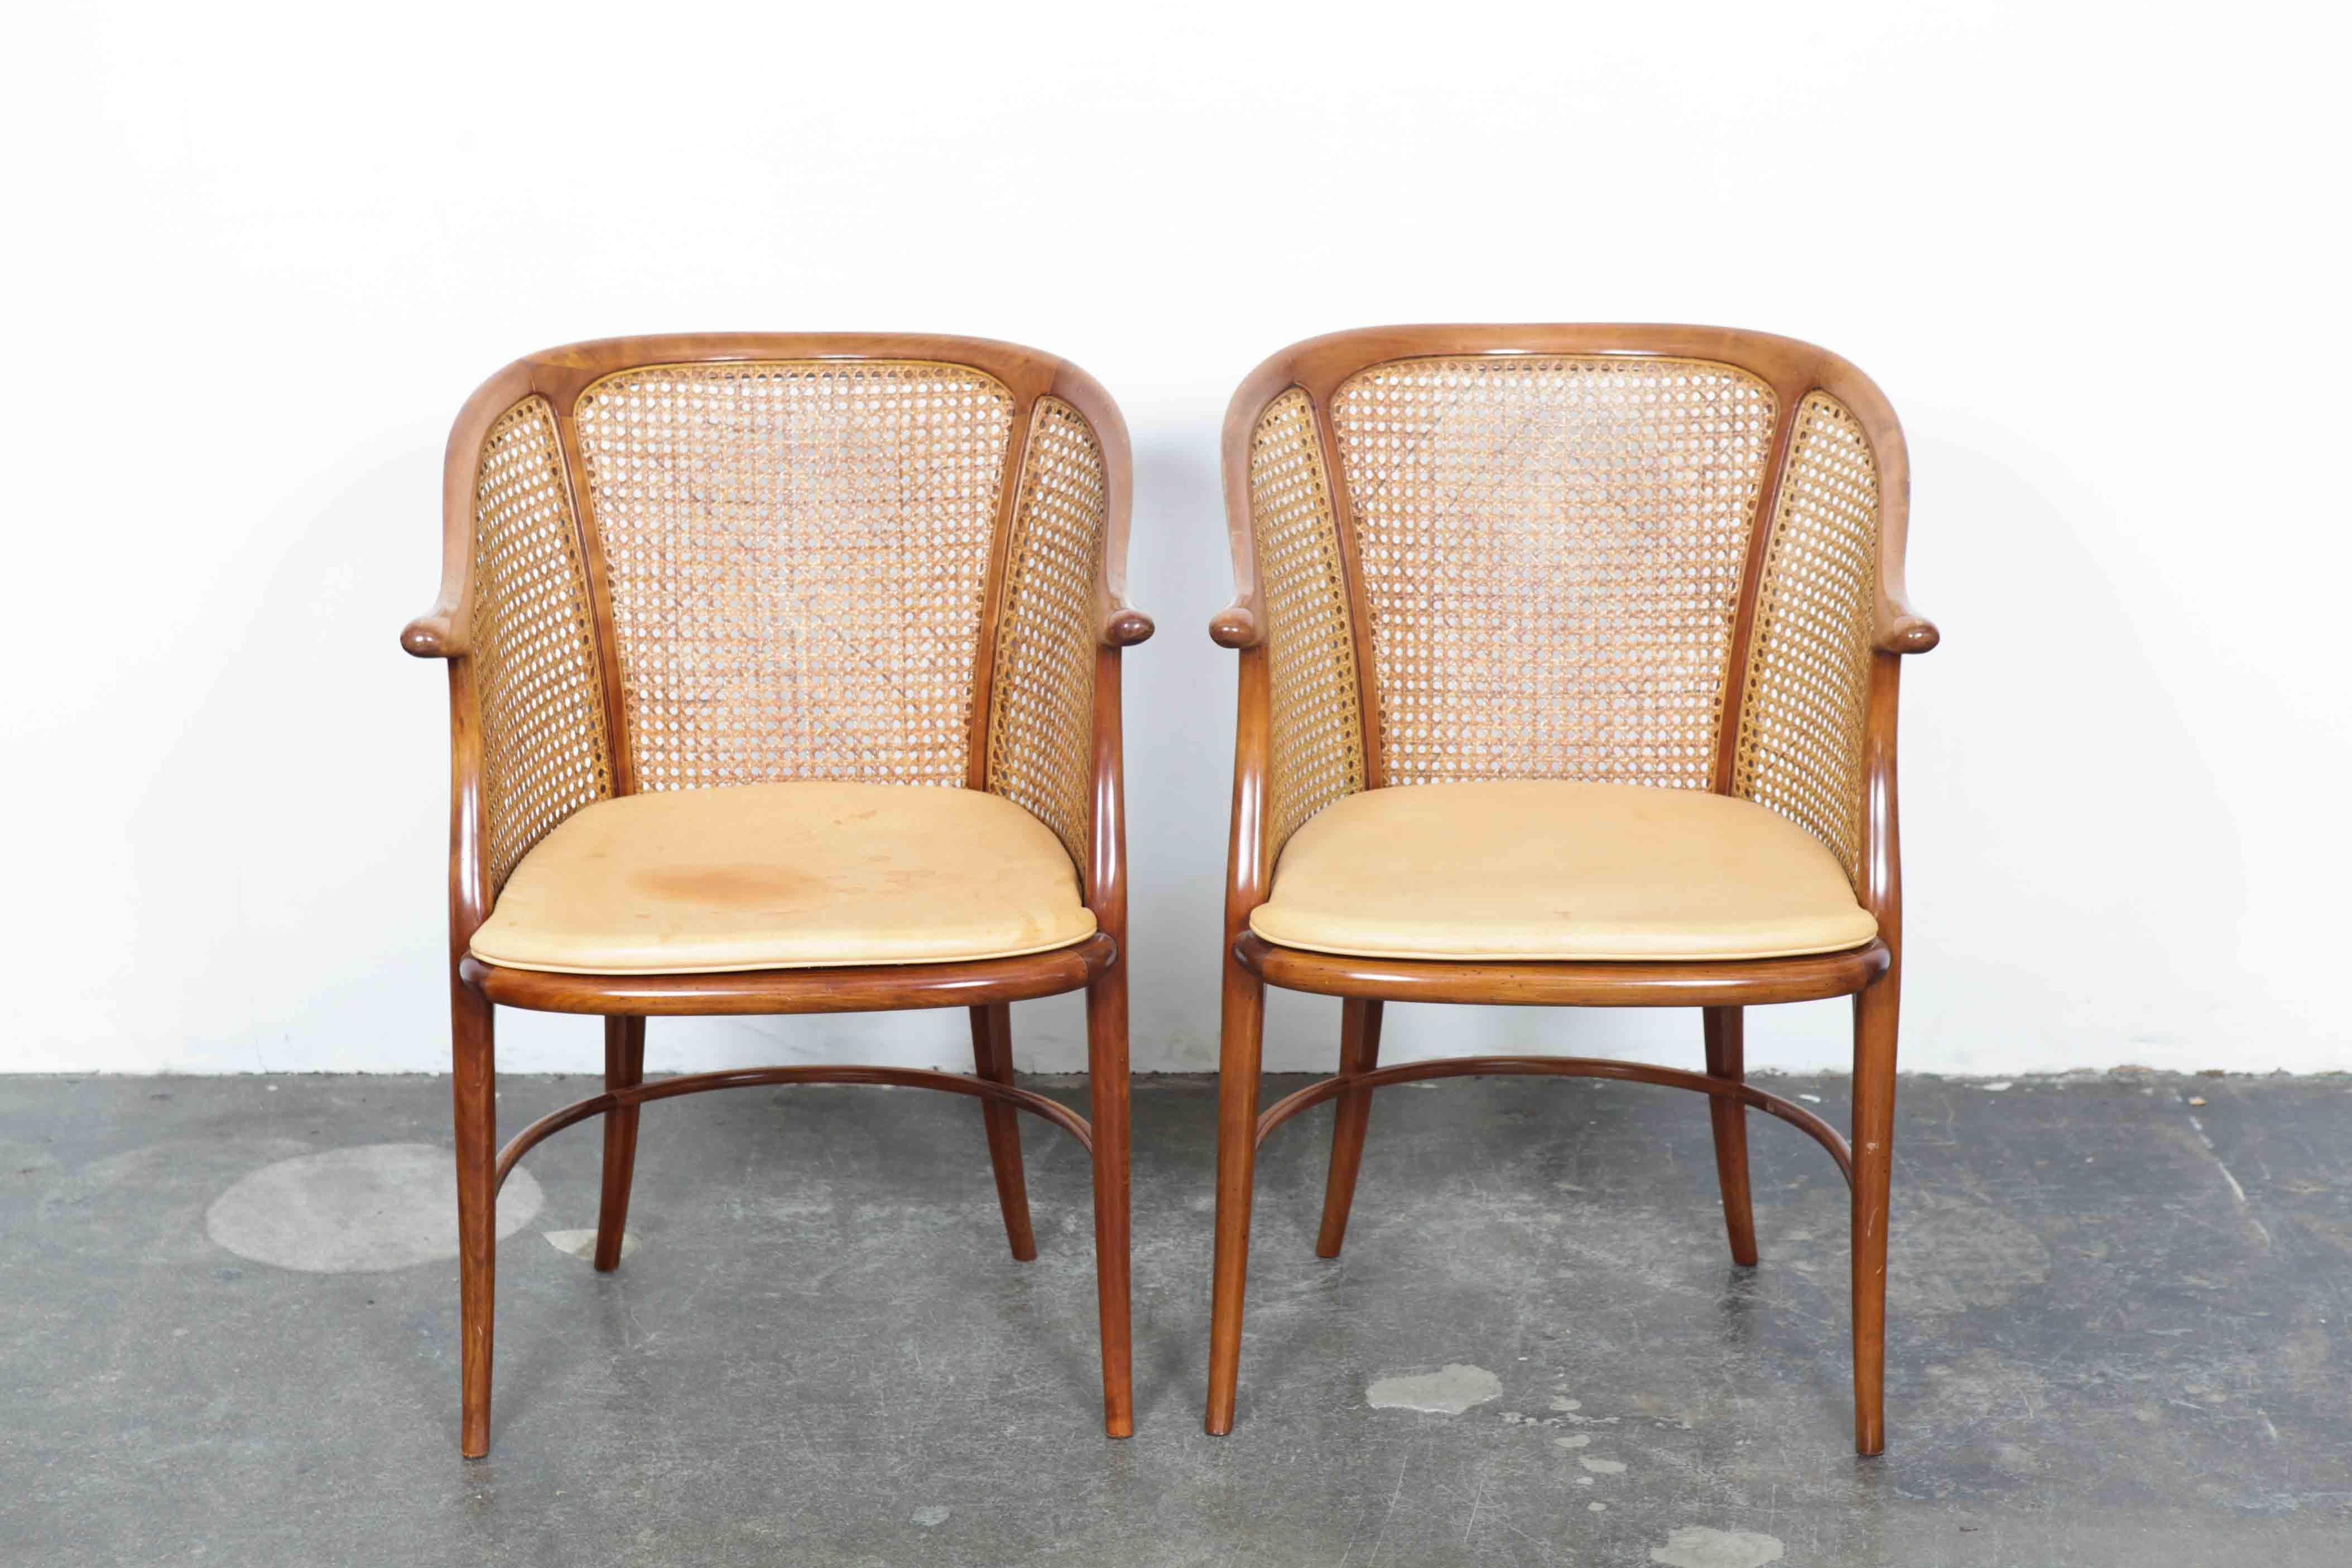 Beautiful set of vintage cheerywood frame chairs with original undamaged cane backs and leather seats. Made in Italy, most likely 1970s, designer and maker unknown. Very elegant, clean lined side chairs. The leather seat pads are original and show